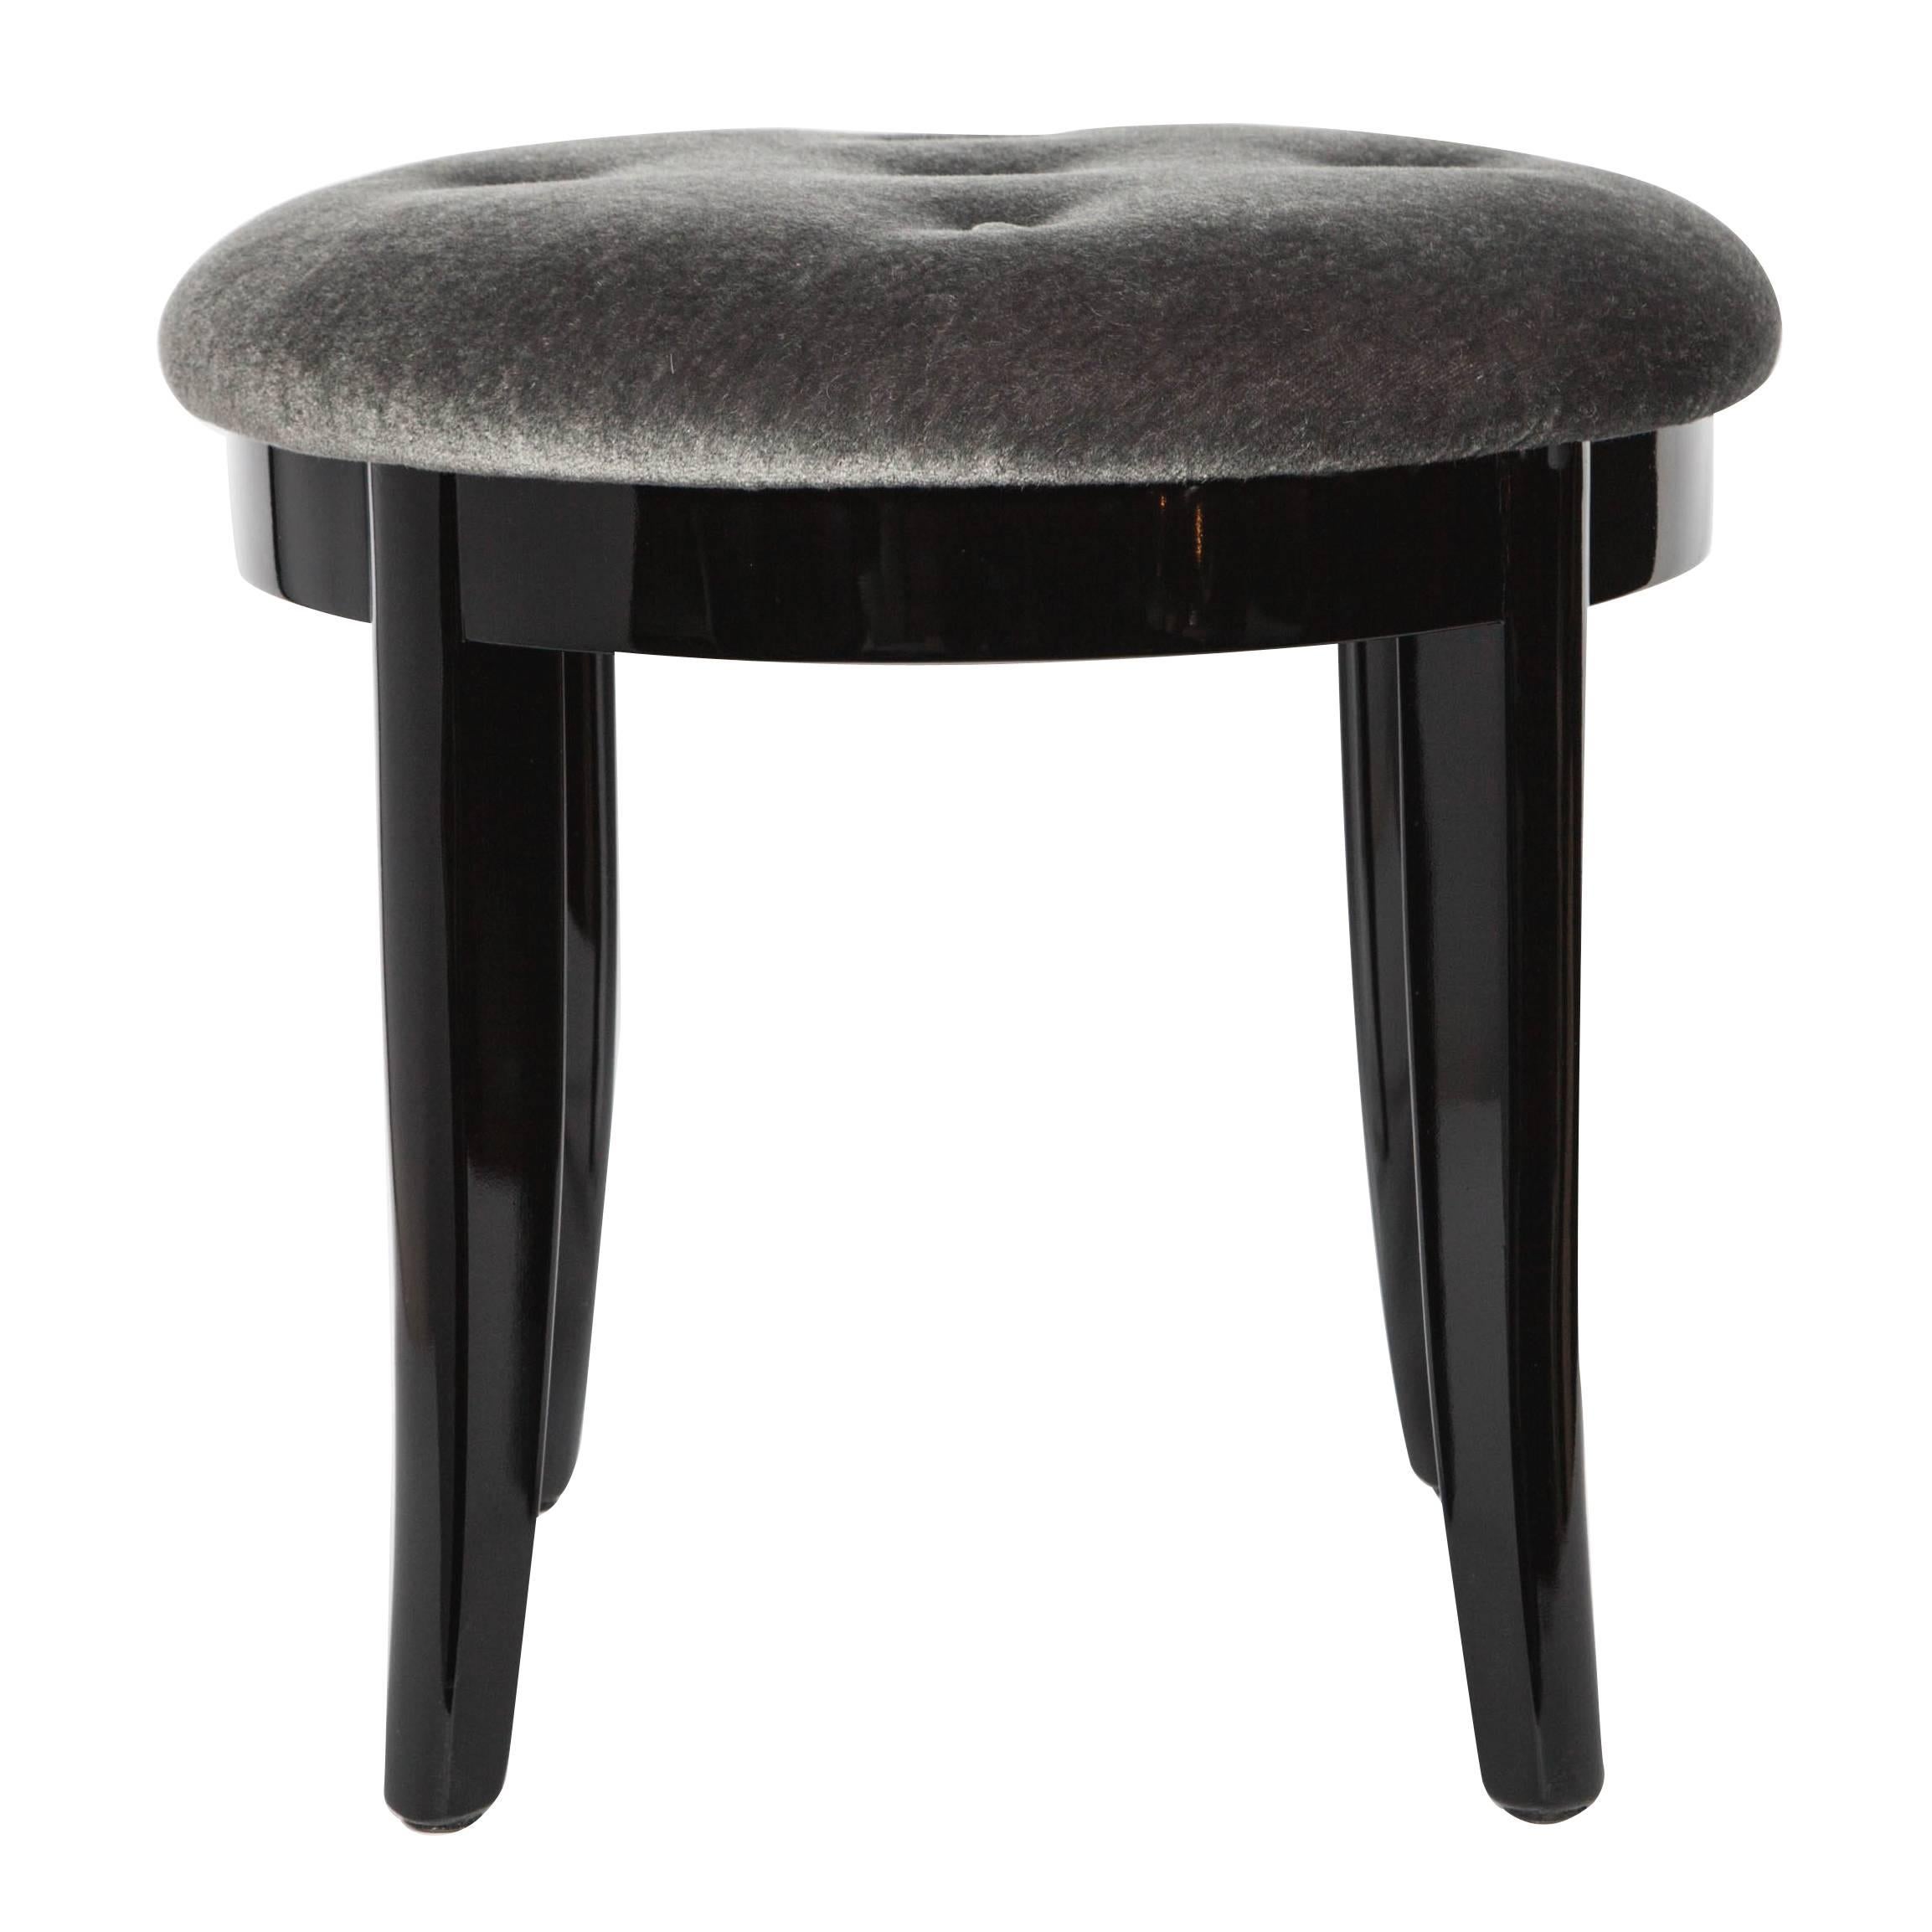 Elegant Art Deco Vanity Stool in Black Lacquer and Grey Mohair